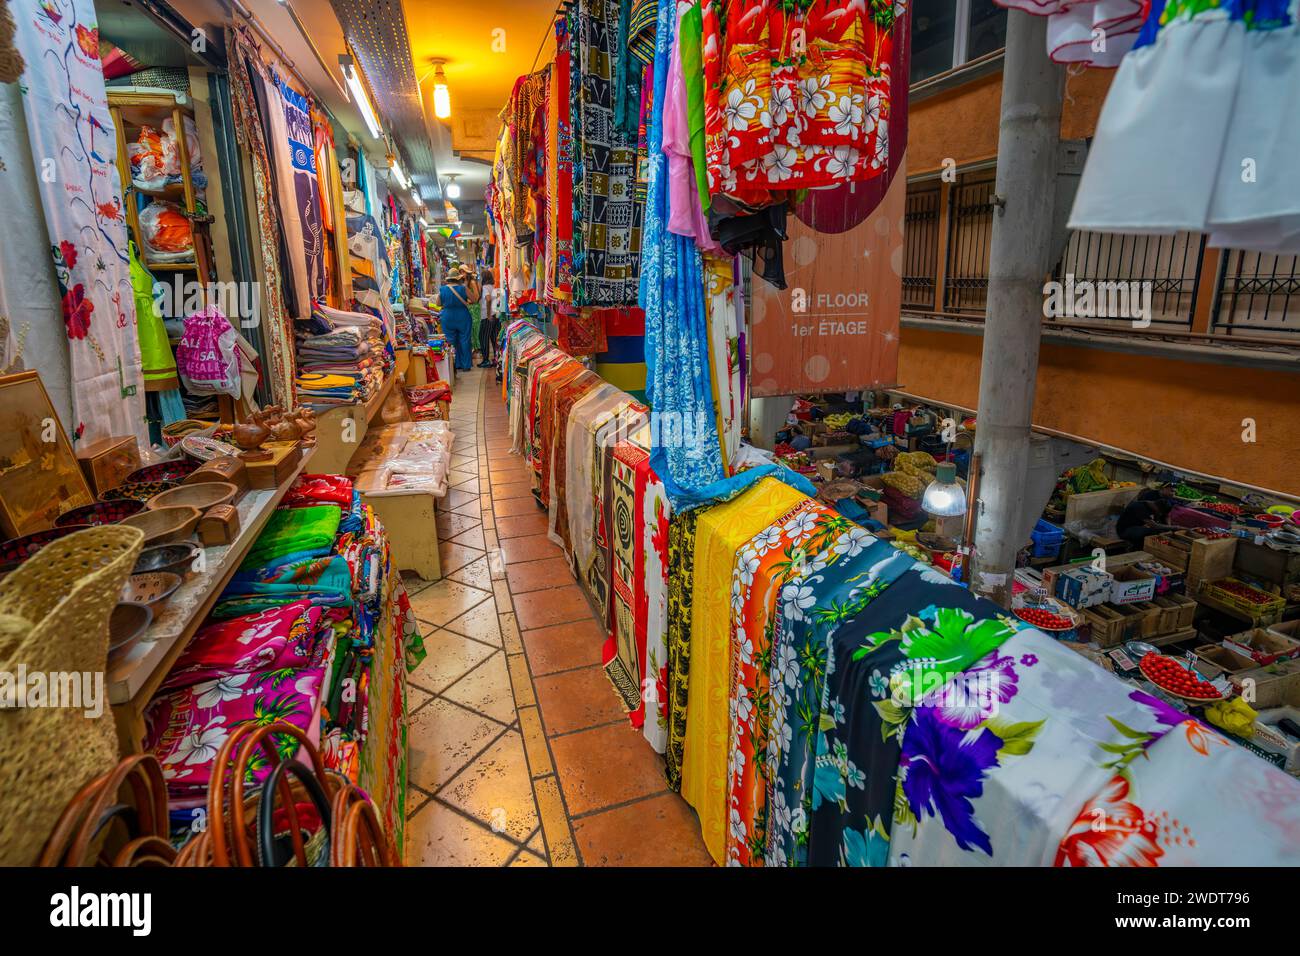 View of bright textiles and market stalls in Central Market in Port Louis, Port Louis, Mauritius, Indian Ocean, Africa Stock Photo